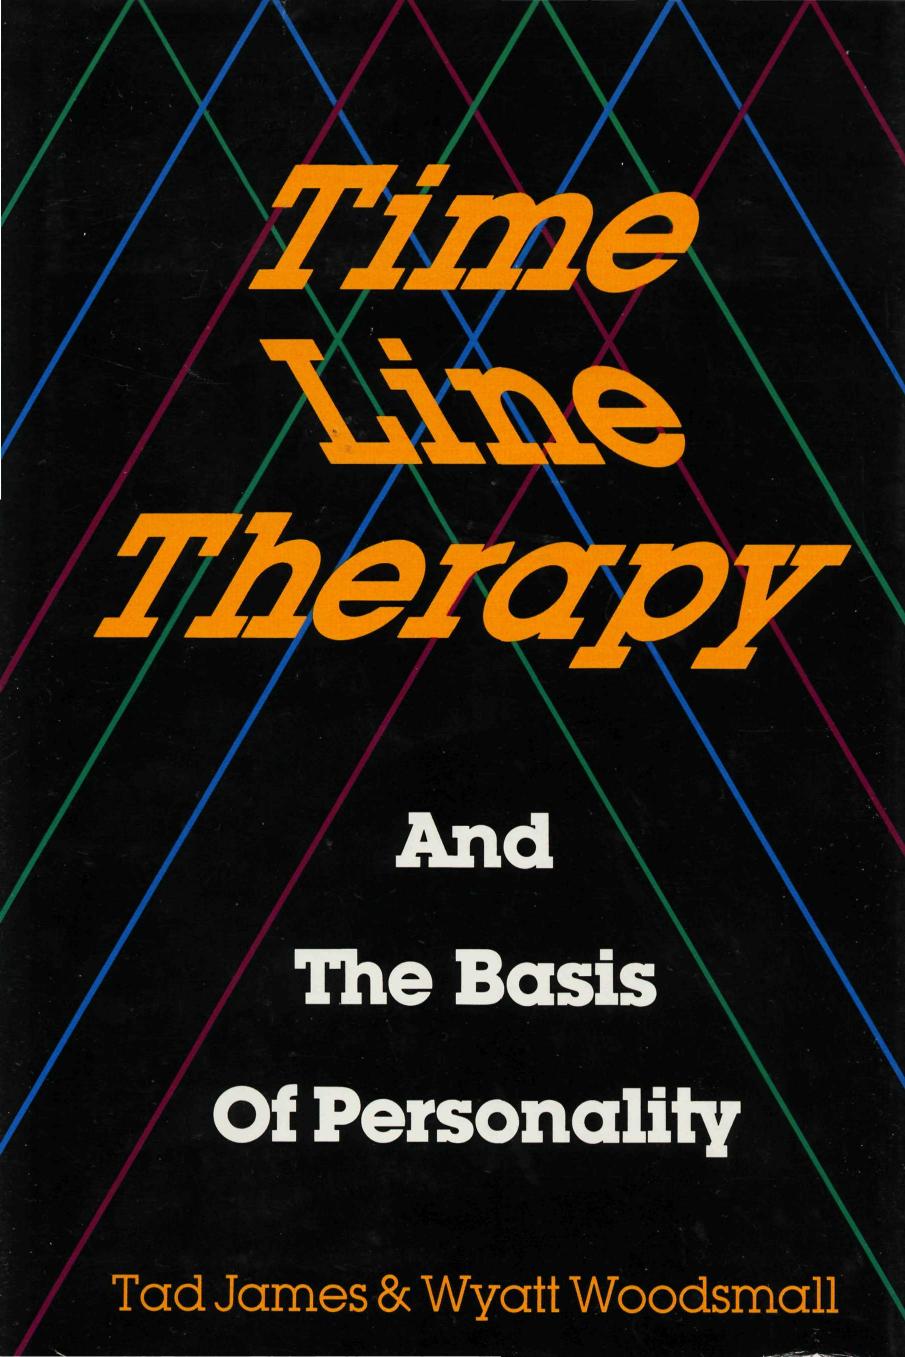 Time line therapy and the basis of personality by None